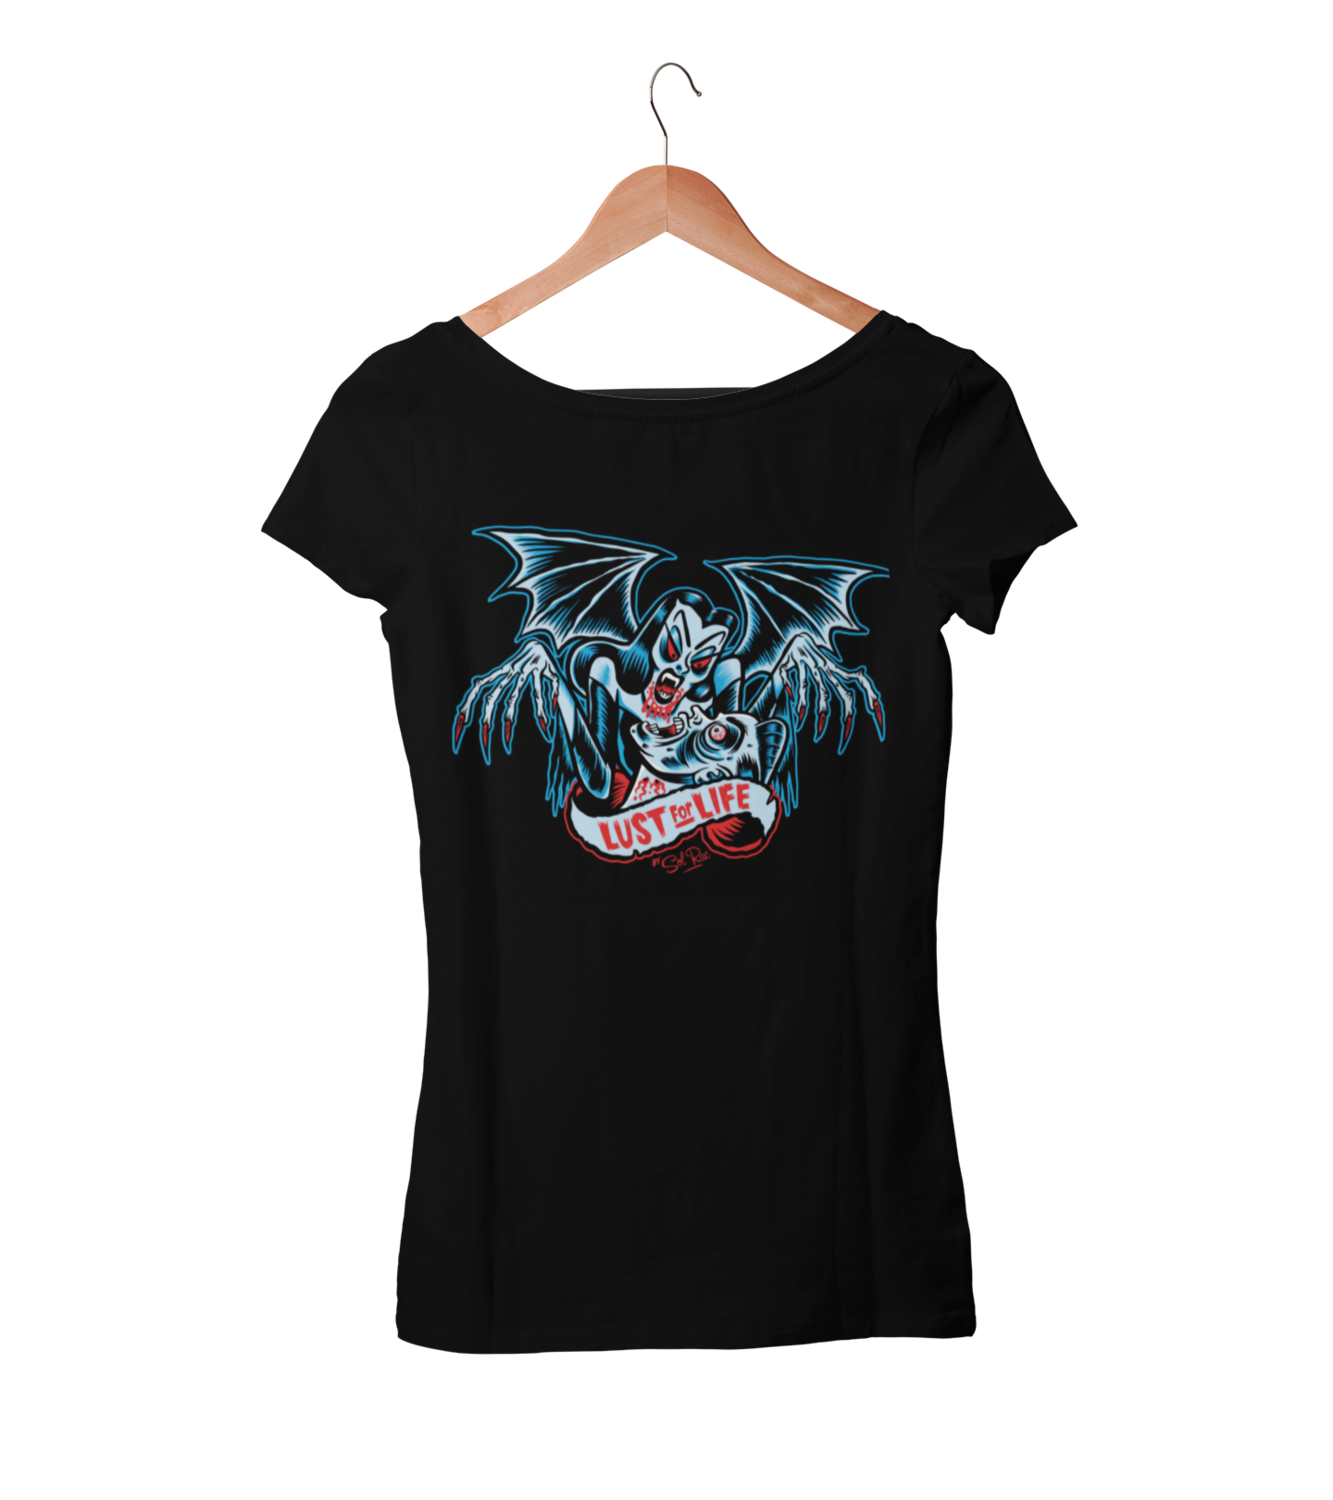 LUST FOR LIFE T-SHIRT WOMAN by SOL RAC